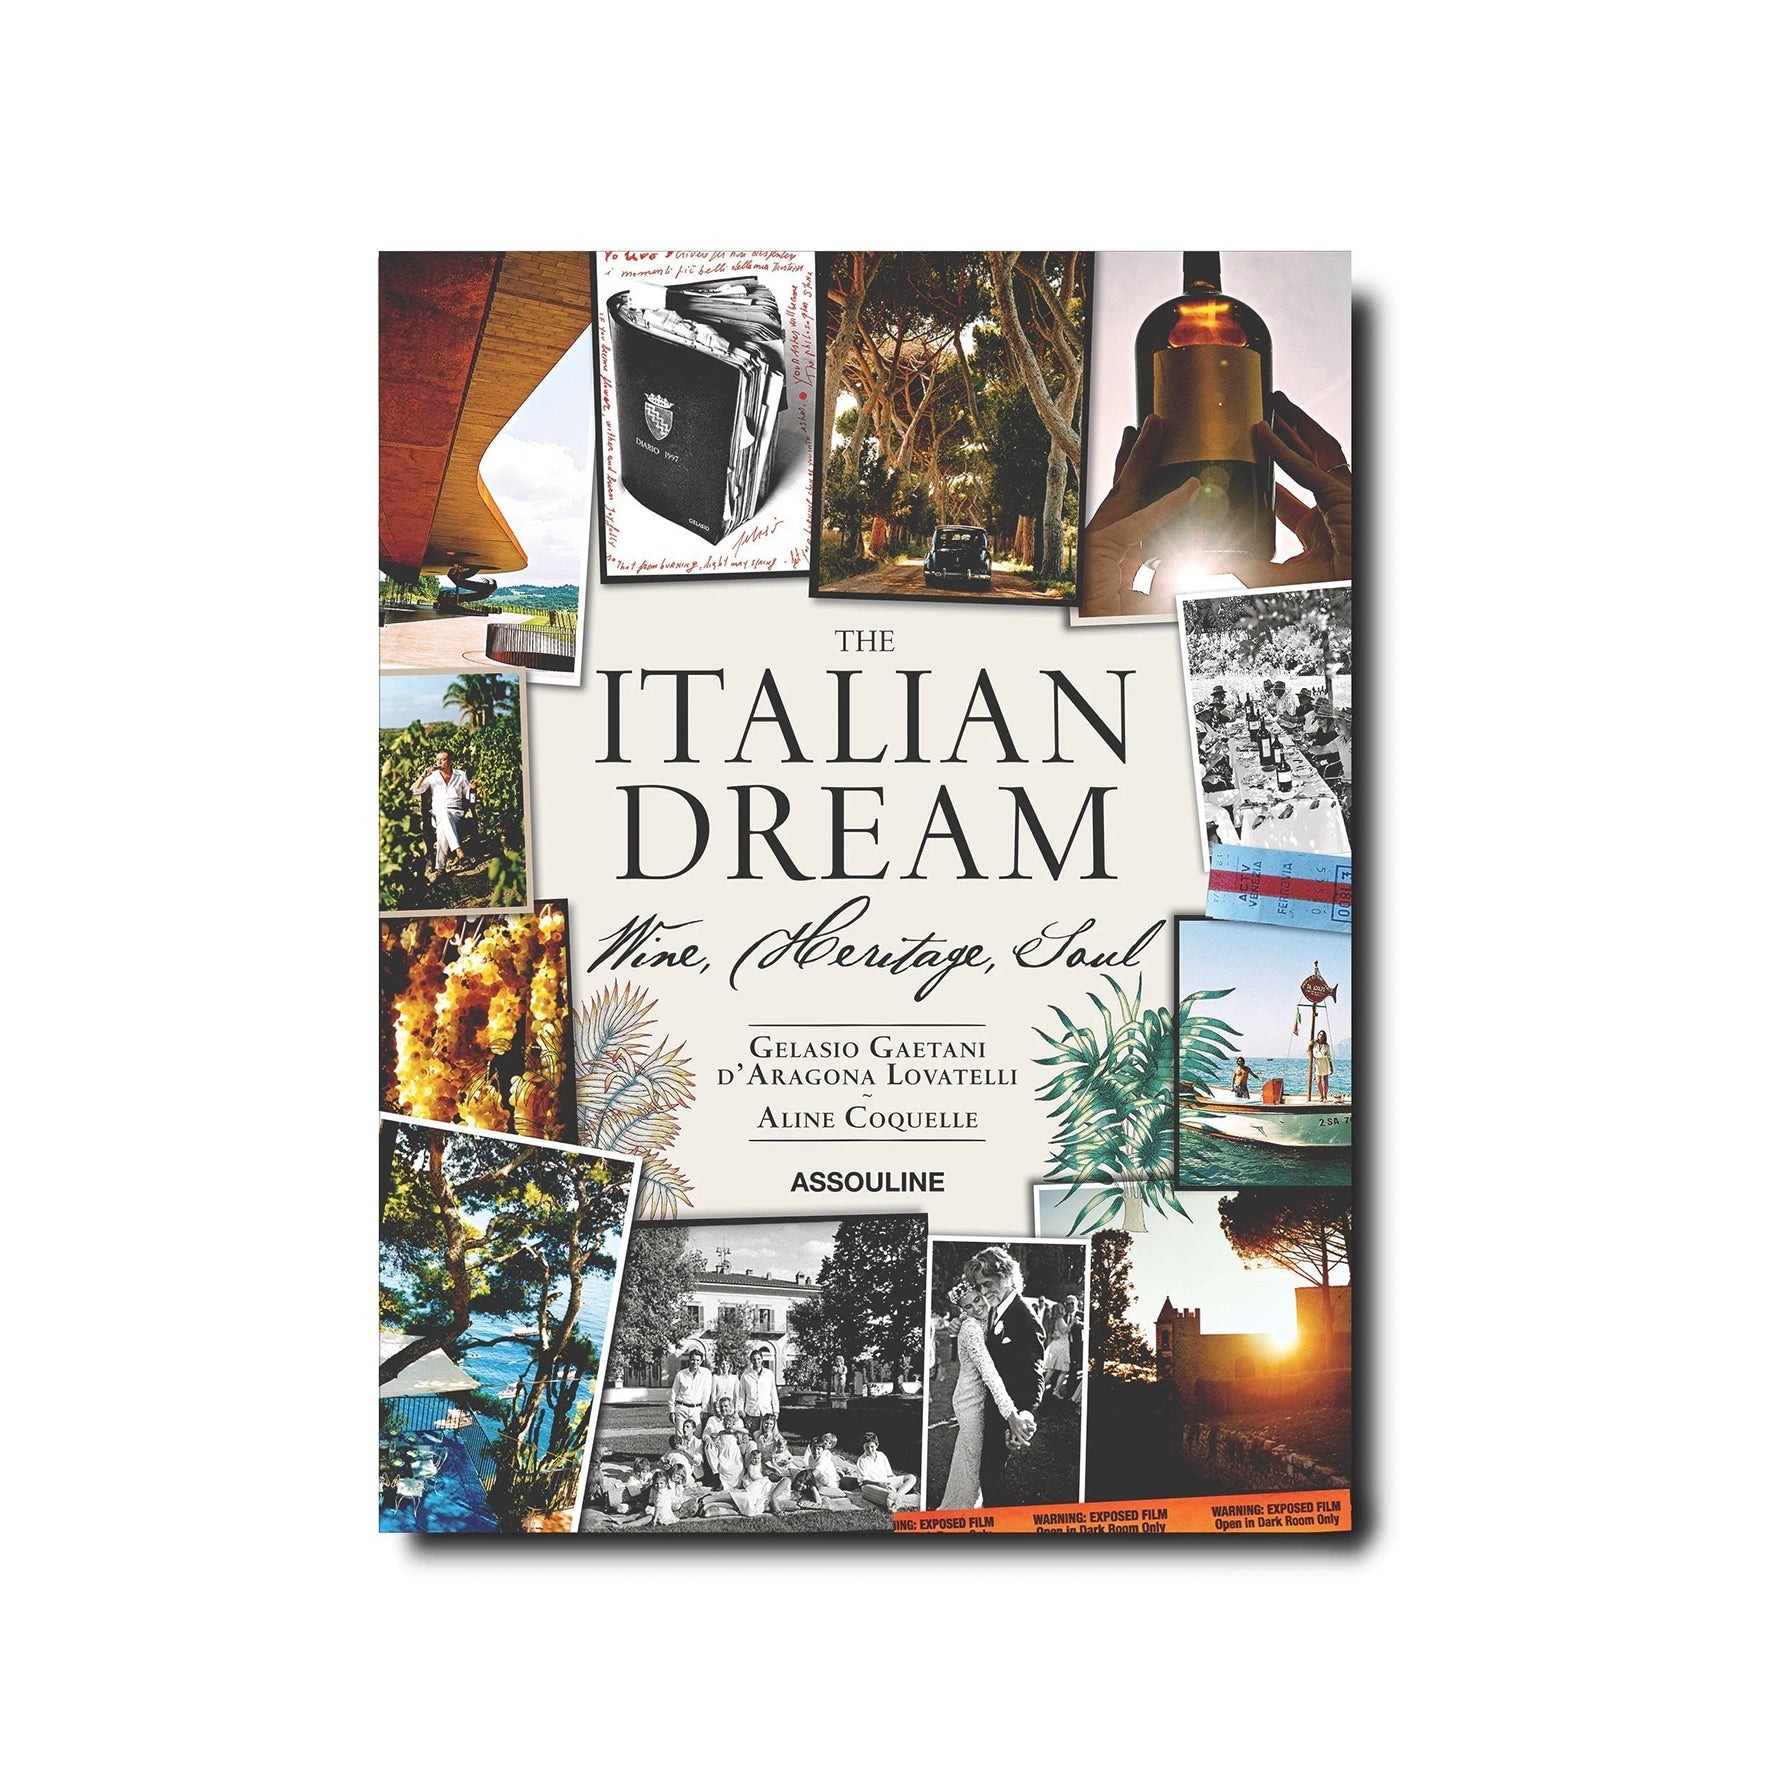 The Italian Dream by Assouline